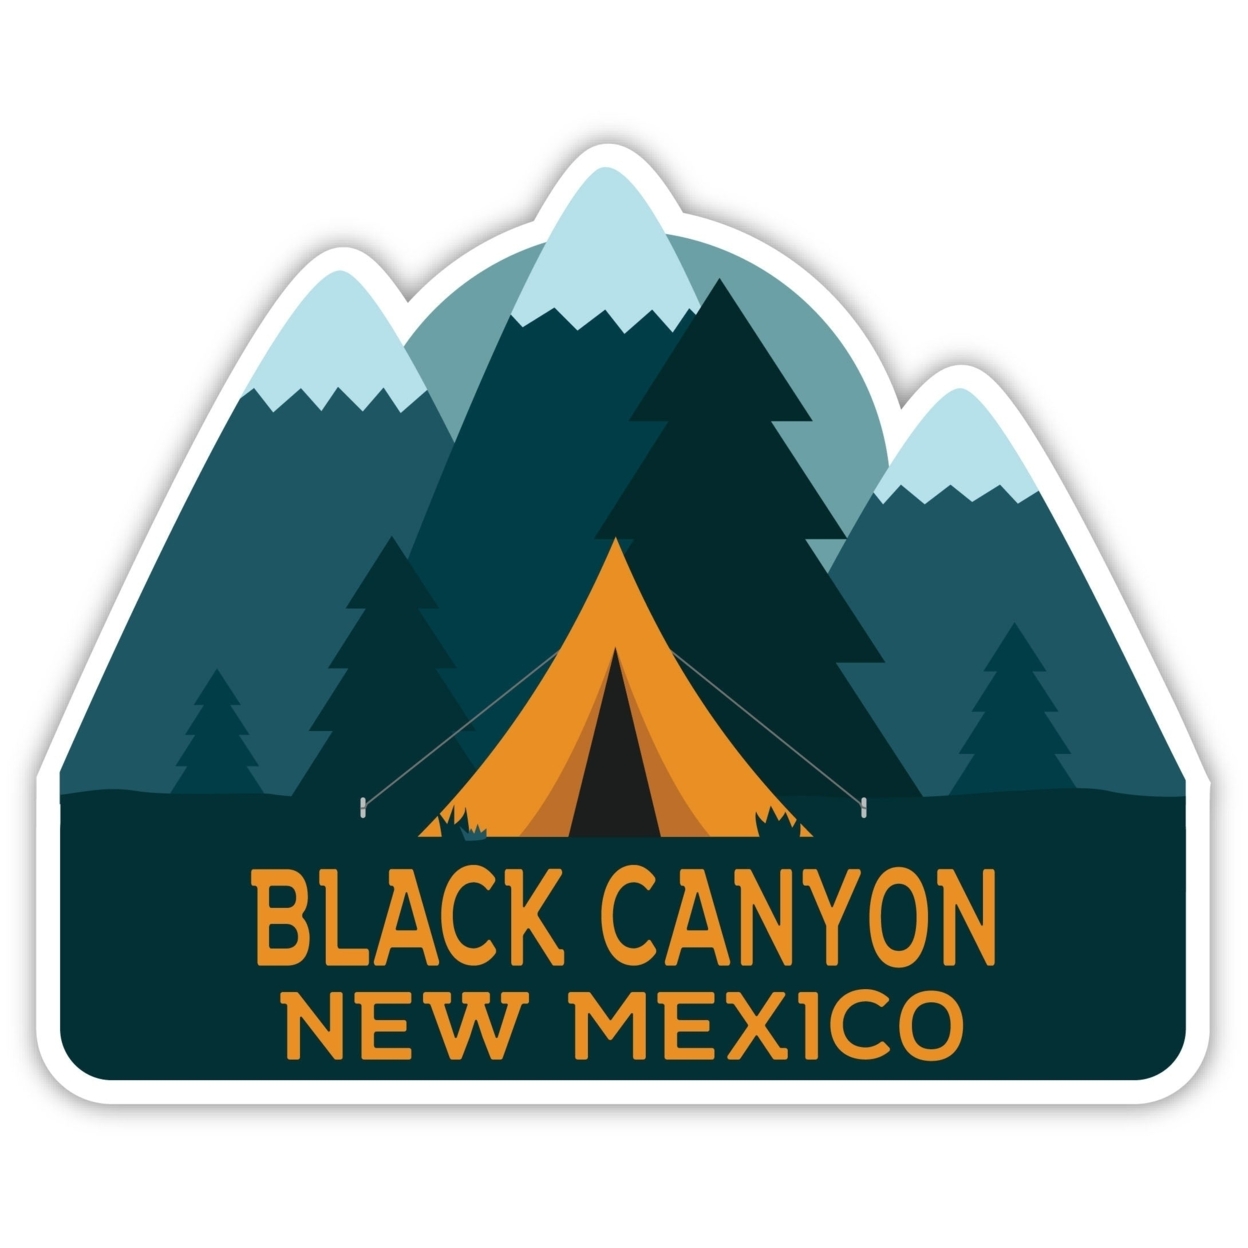 Black Canyon New Mexico Souvenir Decorative Stickers (Choose Theme And Size) - 4-Pack, 2-Inch, Tent